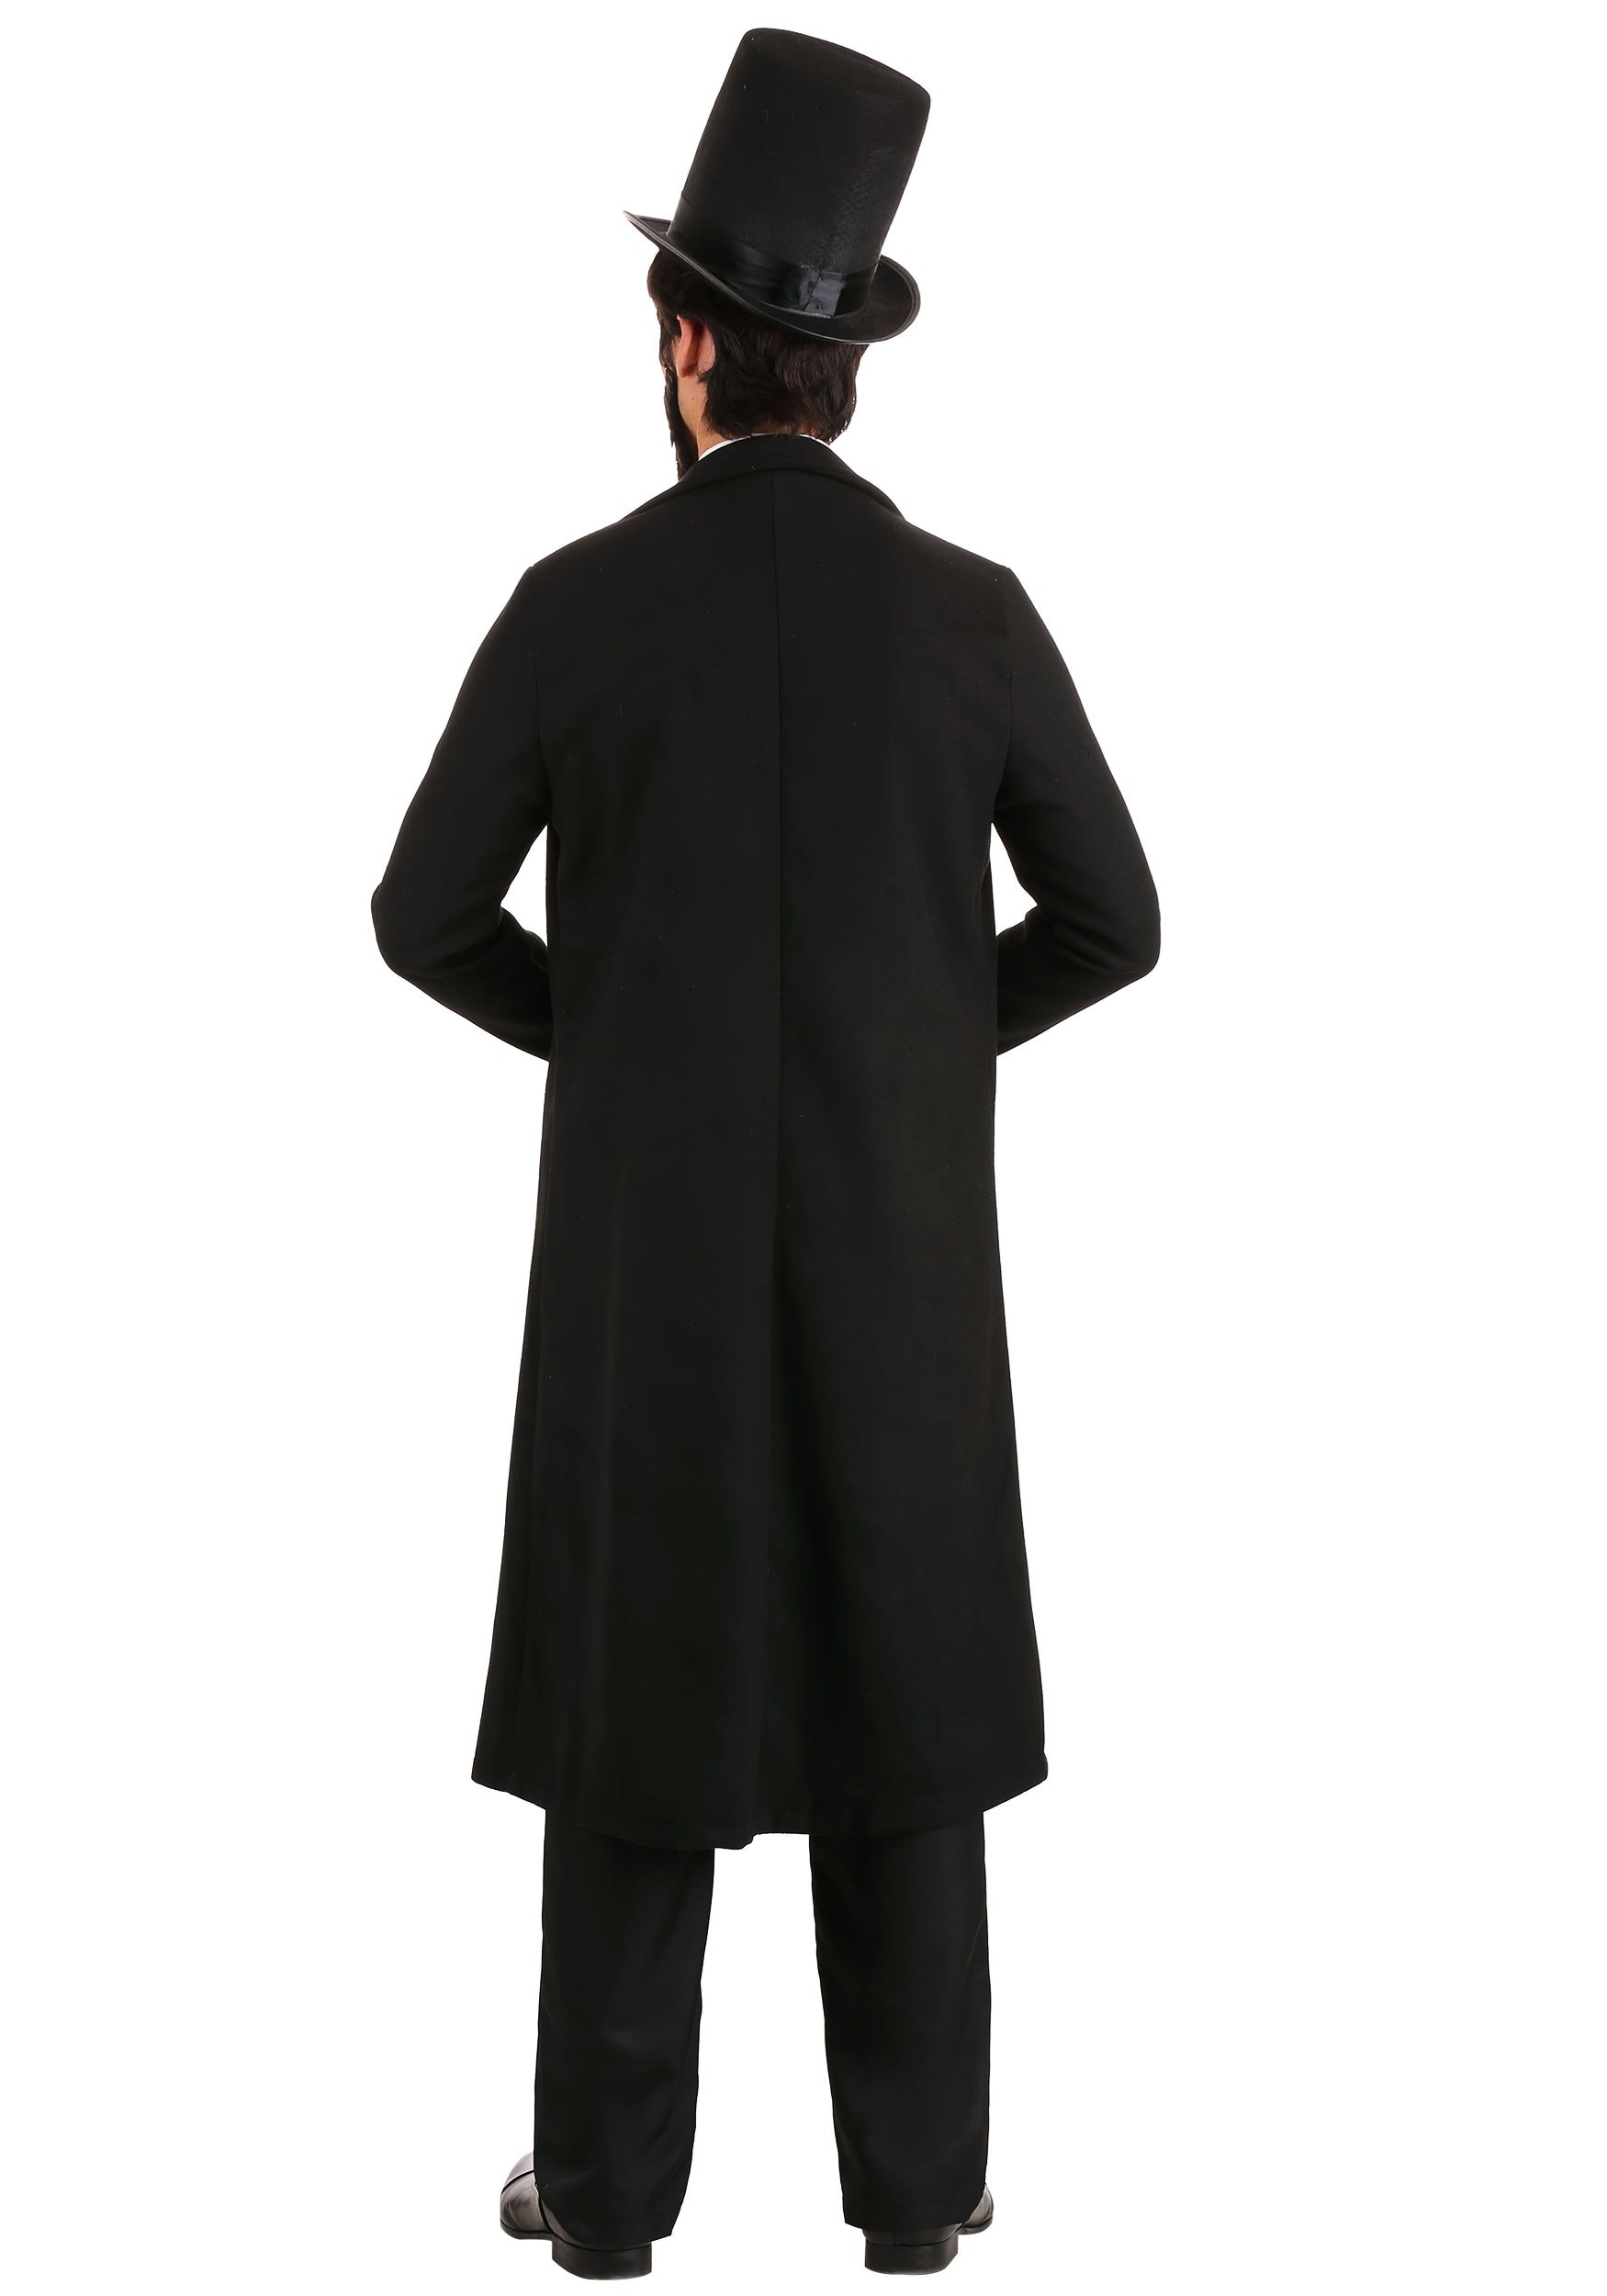 President Abe Lincoln Costume For Adults